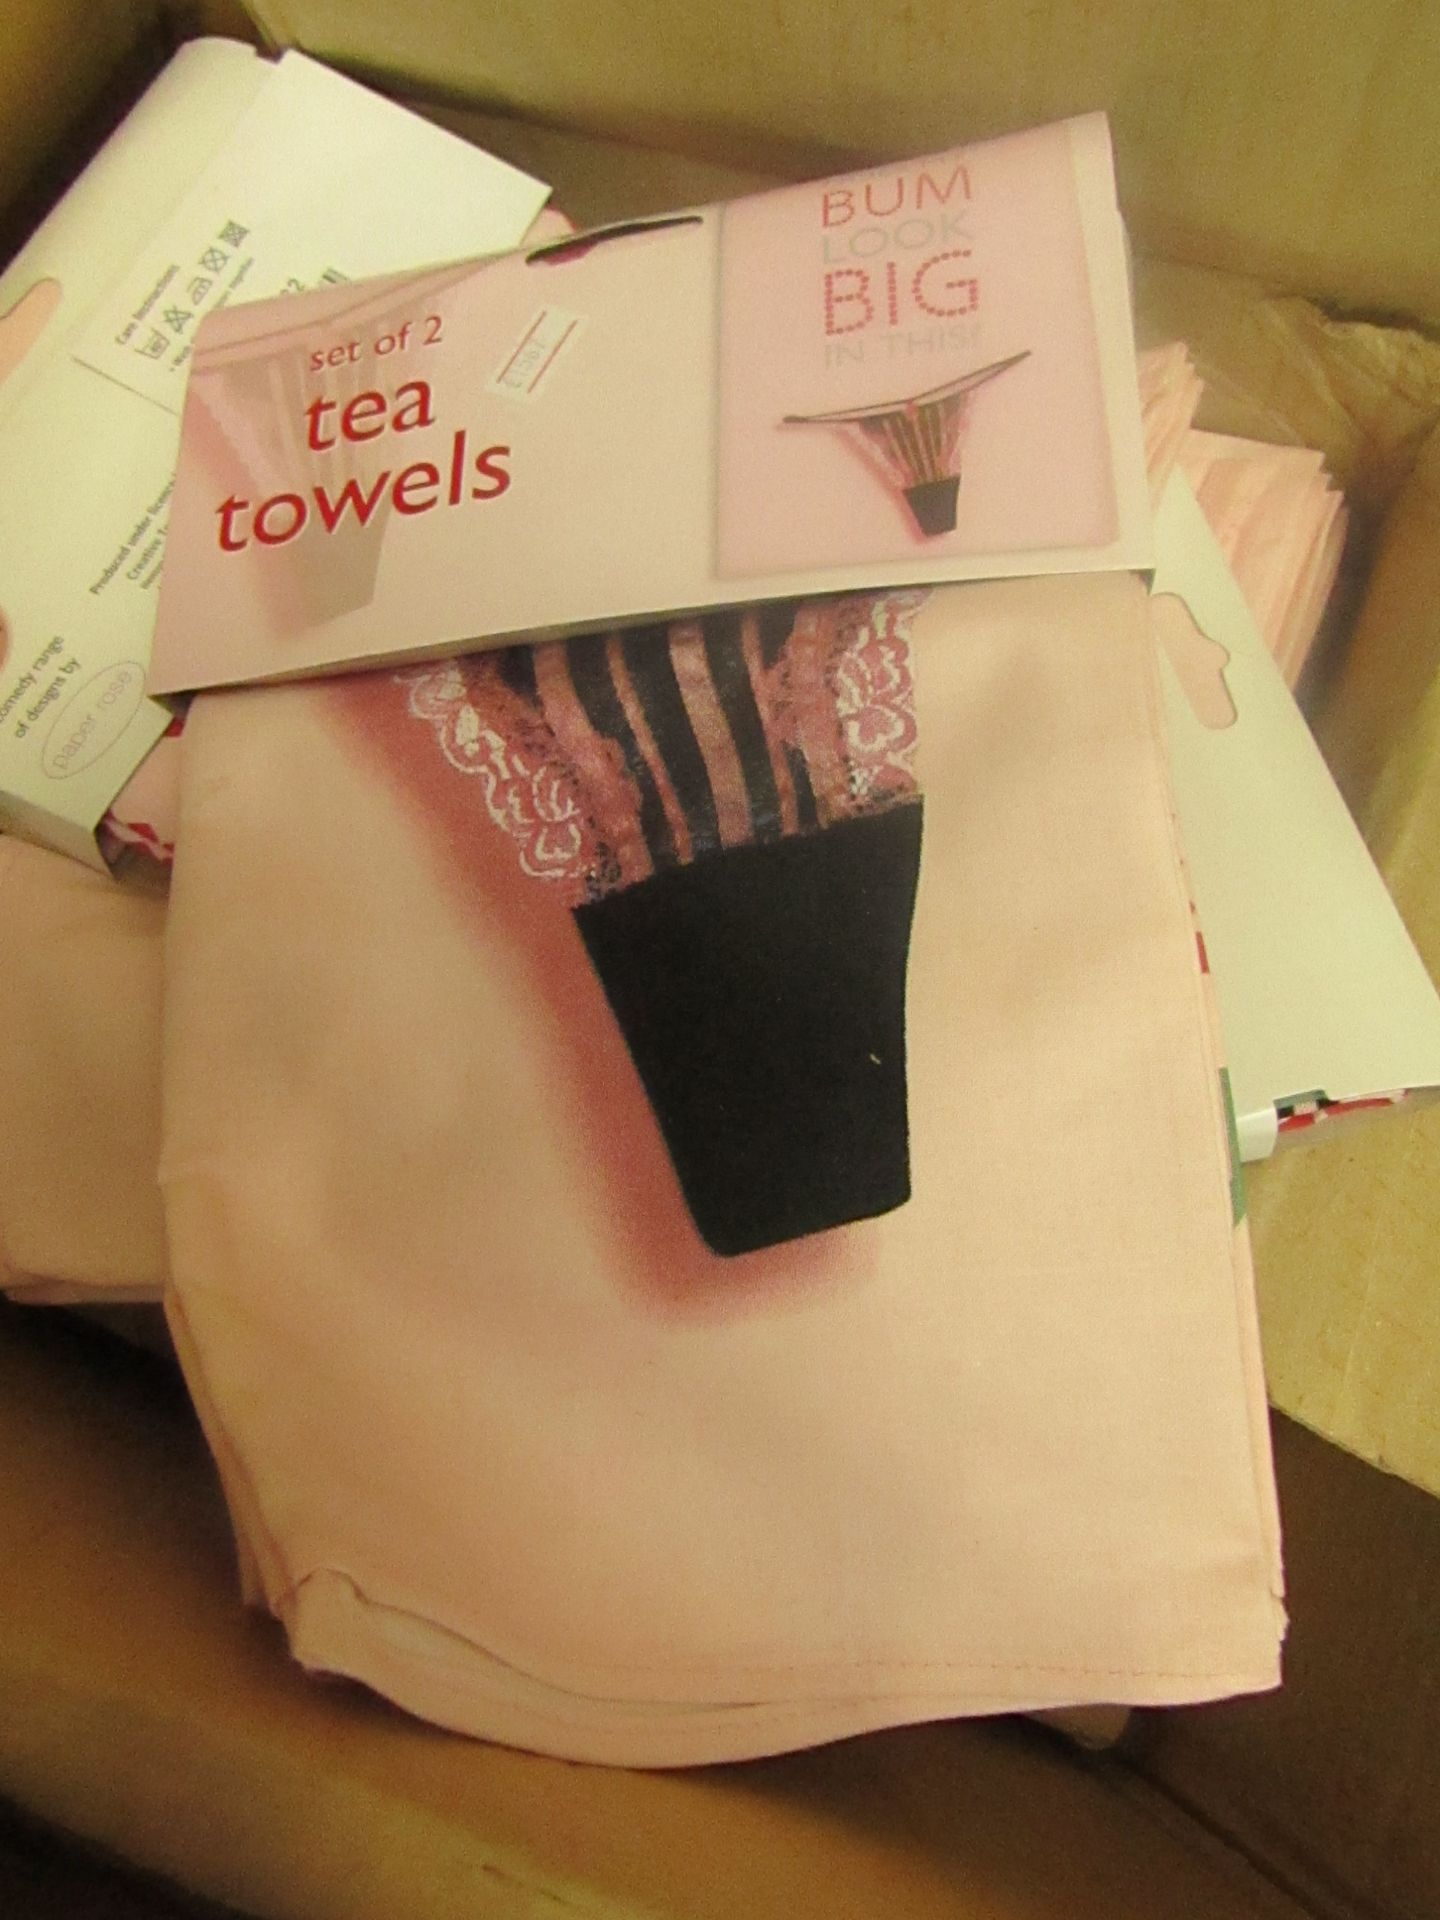 6X Packs of tea towels 2 included per pack - (does my bum look big in this?) all packaged.